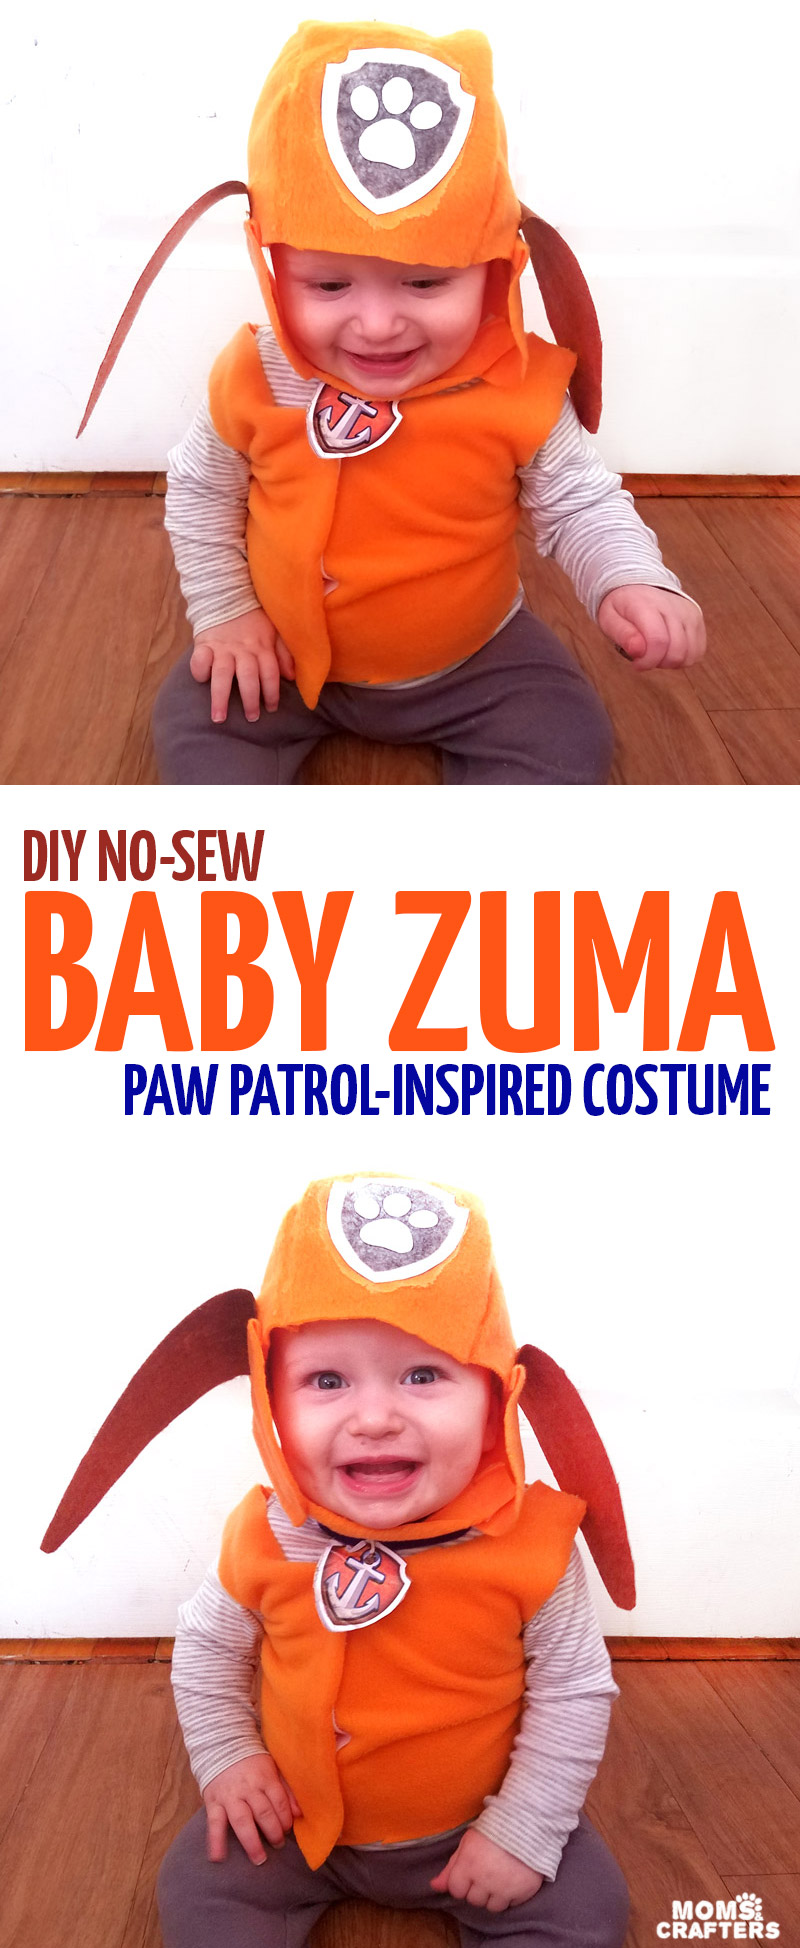 Make this easy BABY ZUMA PAW Patrol costume for toddlers or babies! It's an easy no-sew costume to create and great for a family costume theme. 